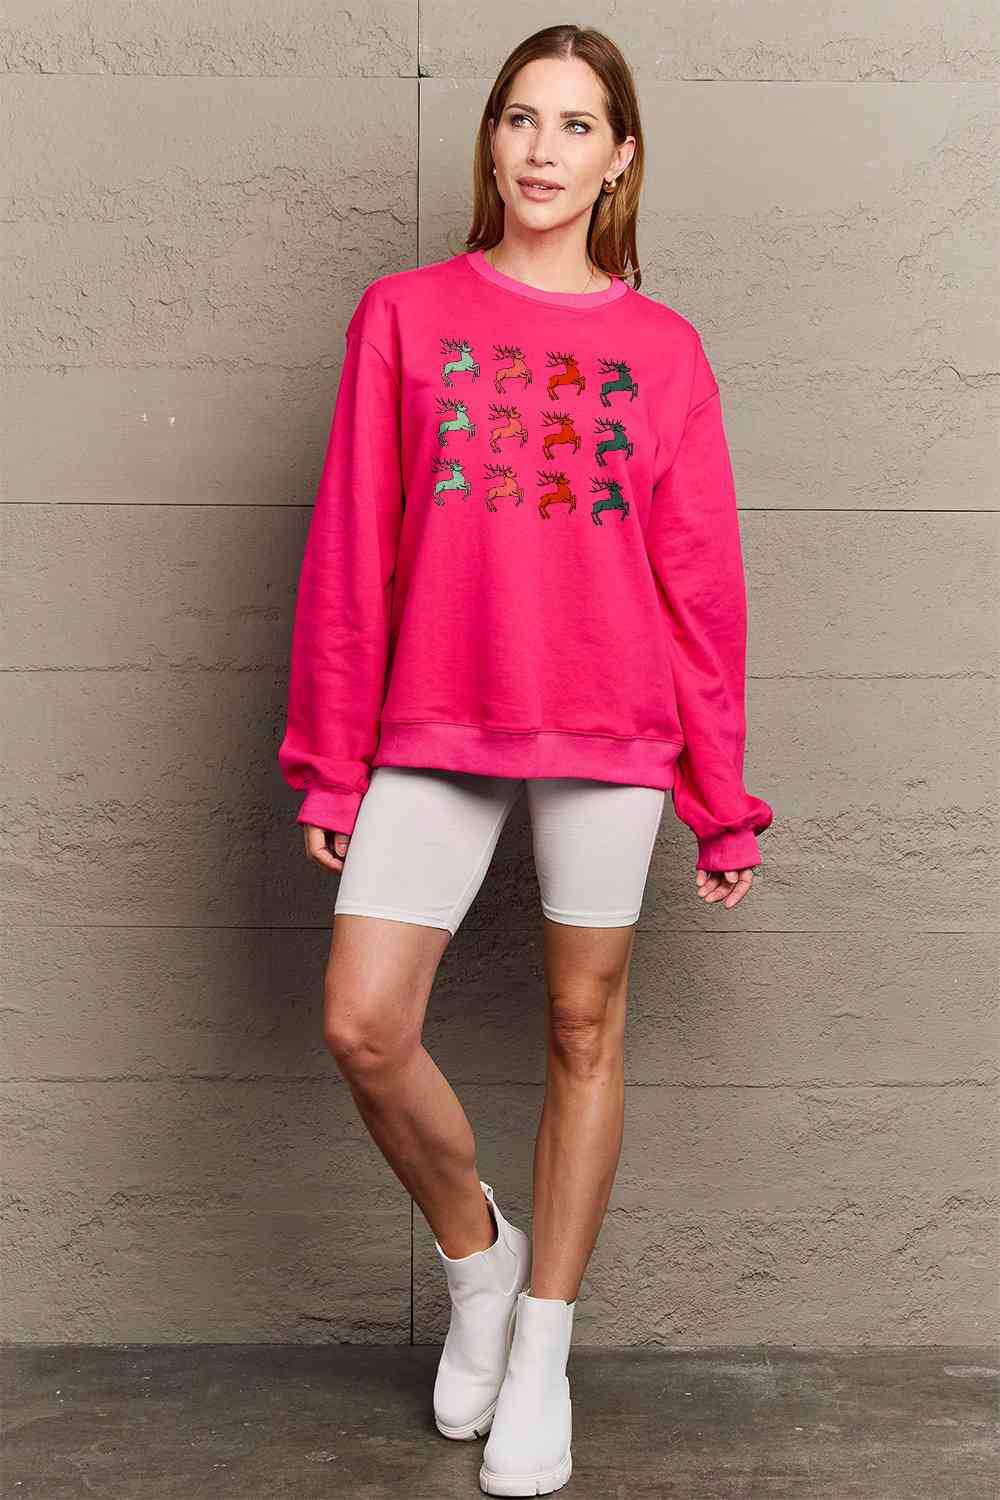 Simply Love Full Size Graphic Long Sleeve Sweatshirt Print on any thing USA/STOD clothes